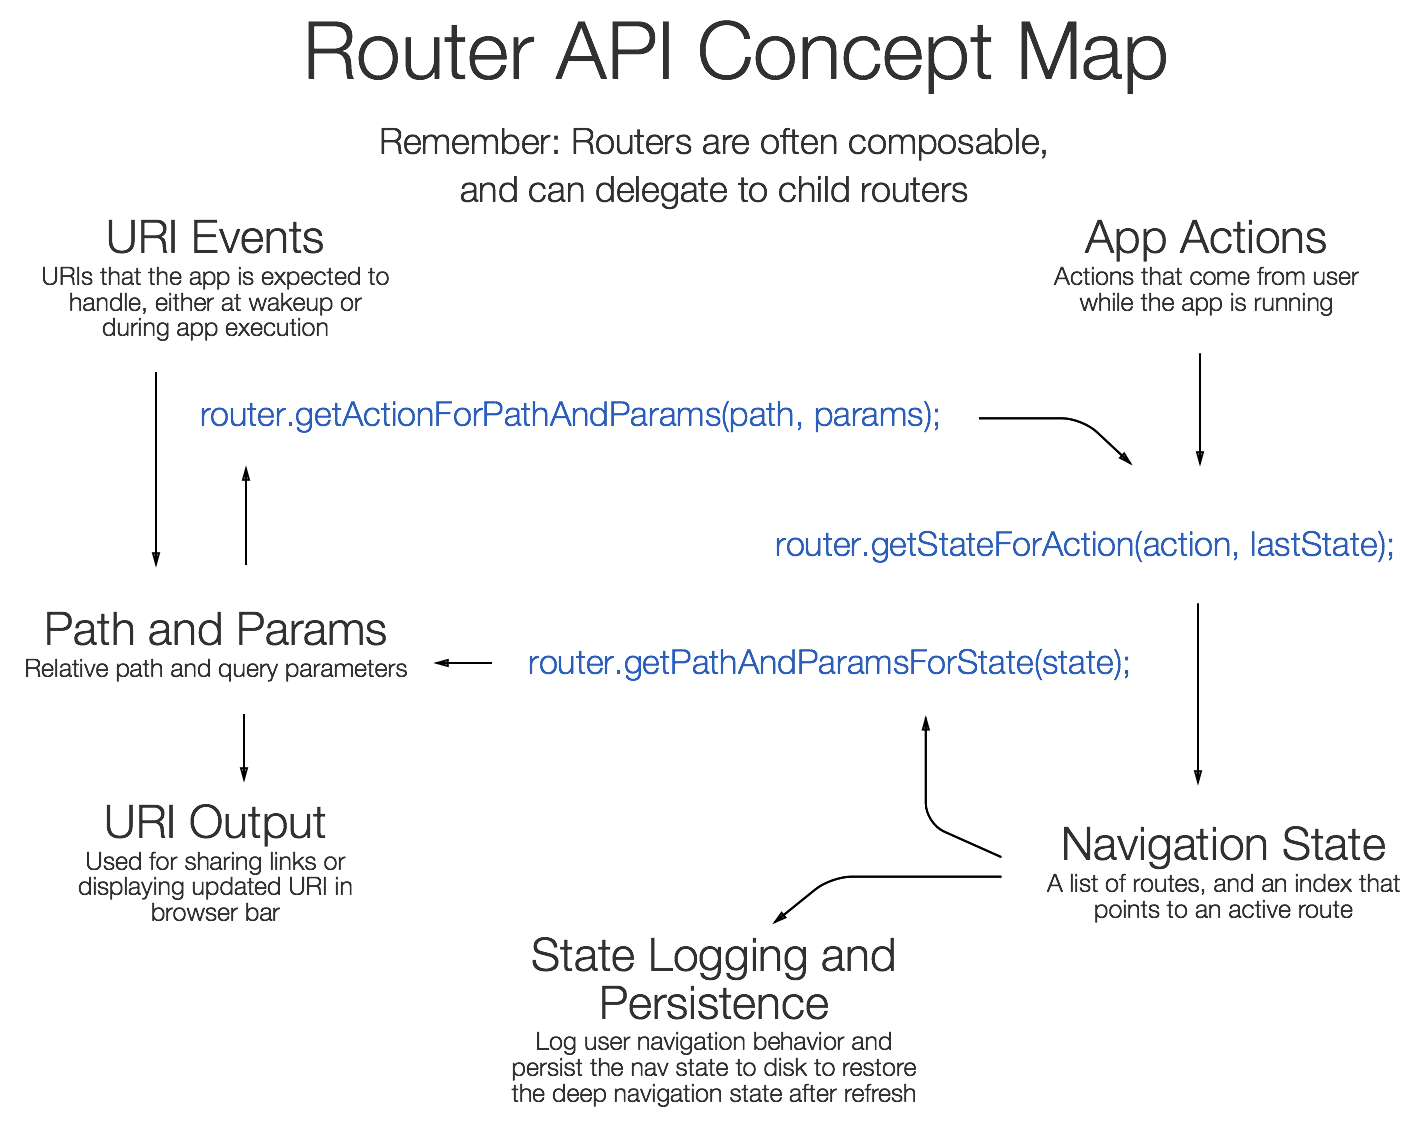 Routers manage the relationship between URIs, actions, and navigation state